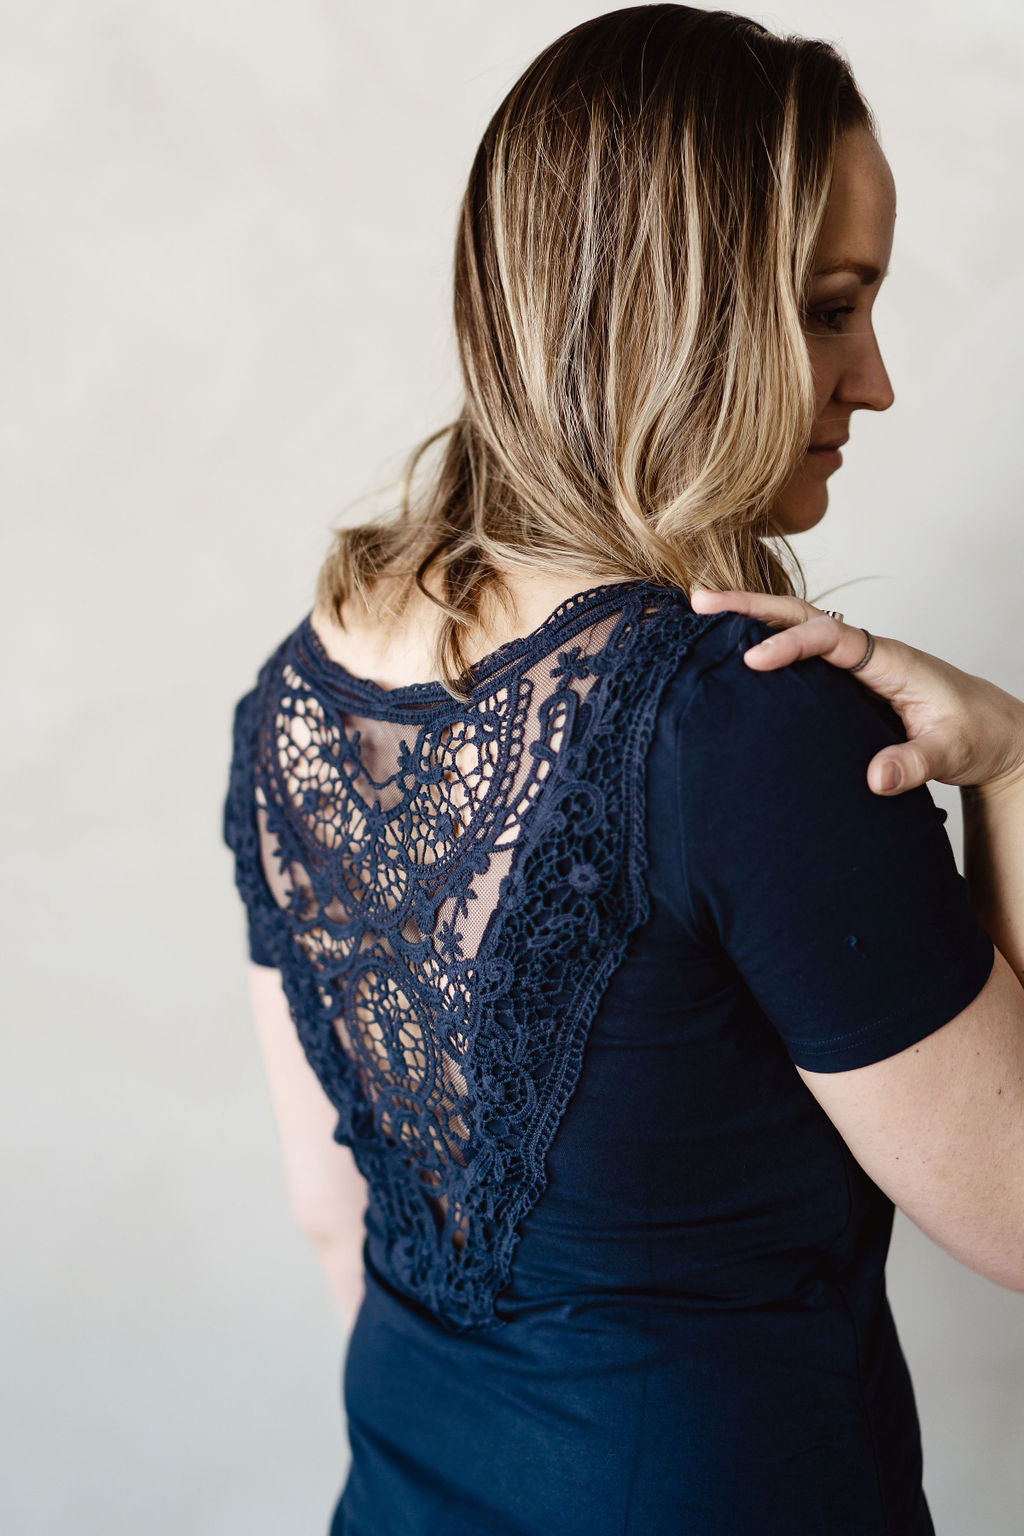 Lace back T-shirt navy reversible 3 in 1 maternity, nursing and postpartum Koallac